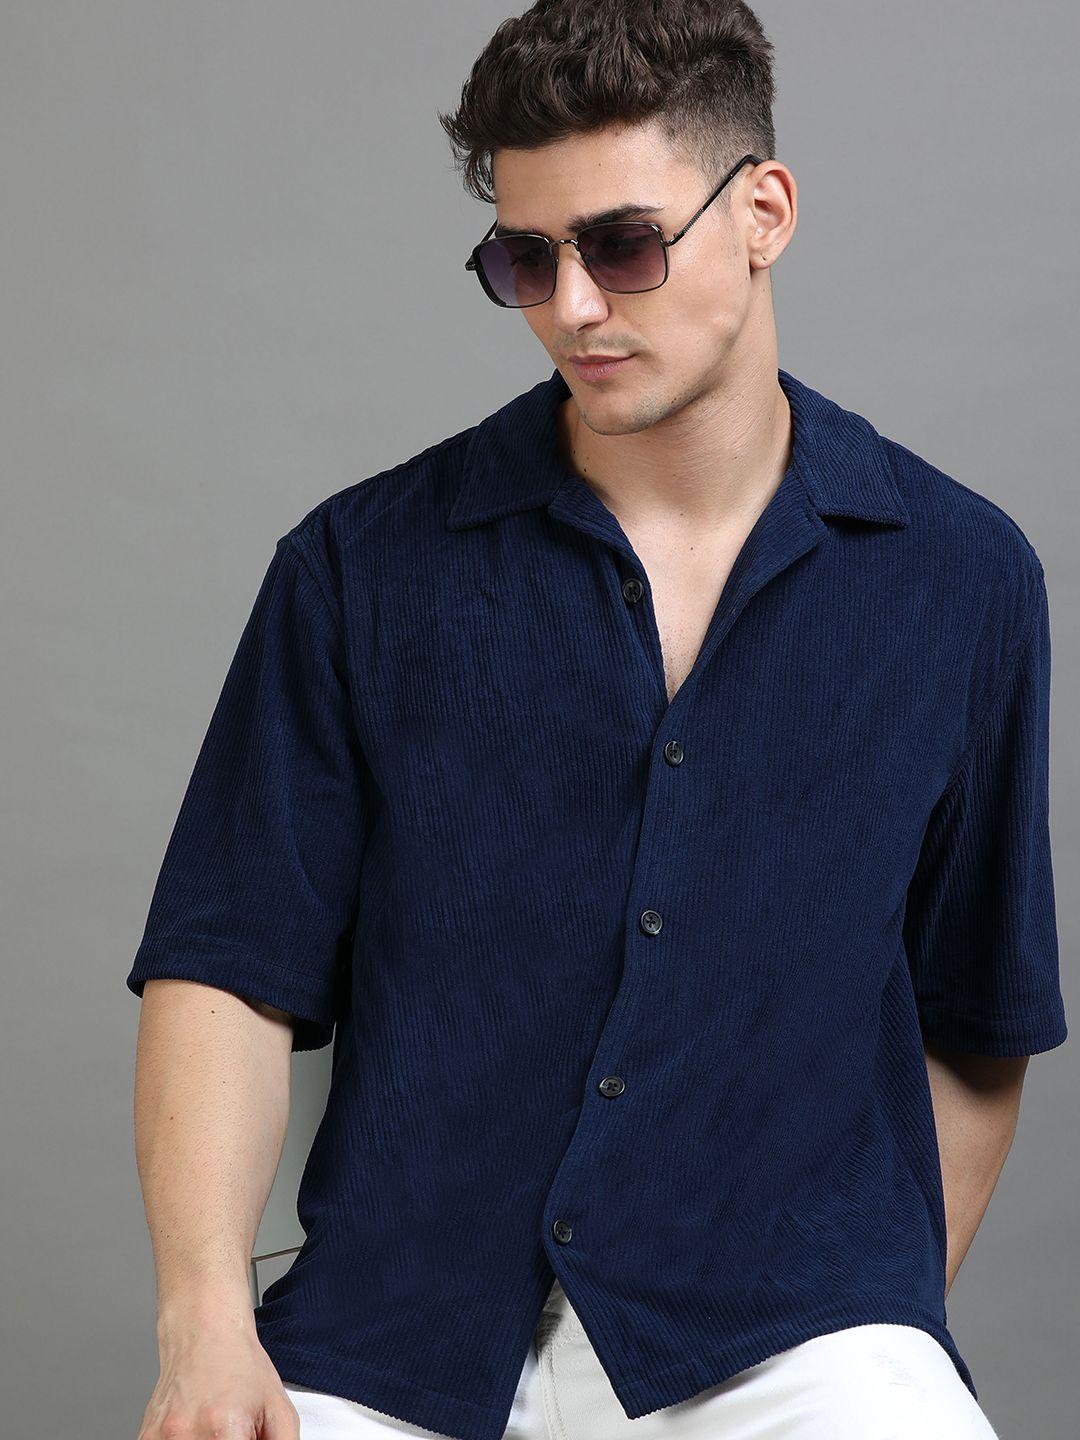 here&now-oversized-ribbed-corduroy-casual-shirt